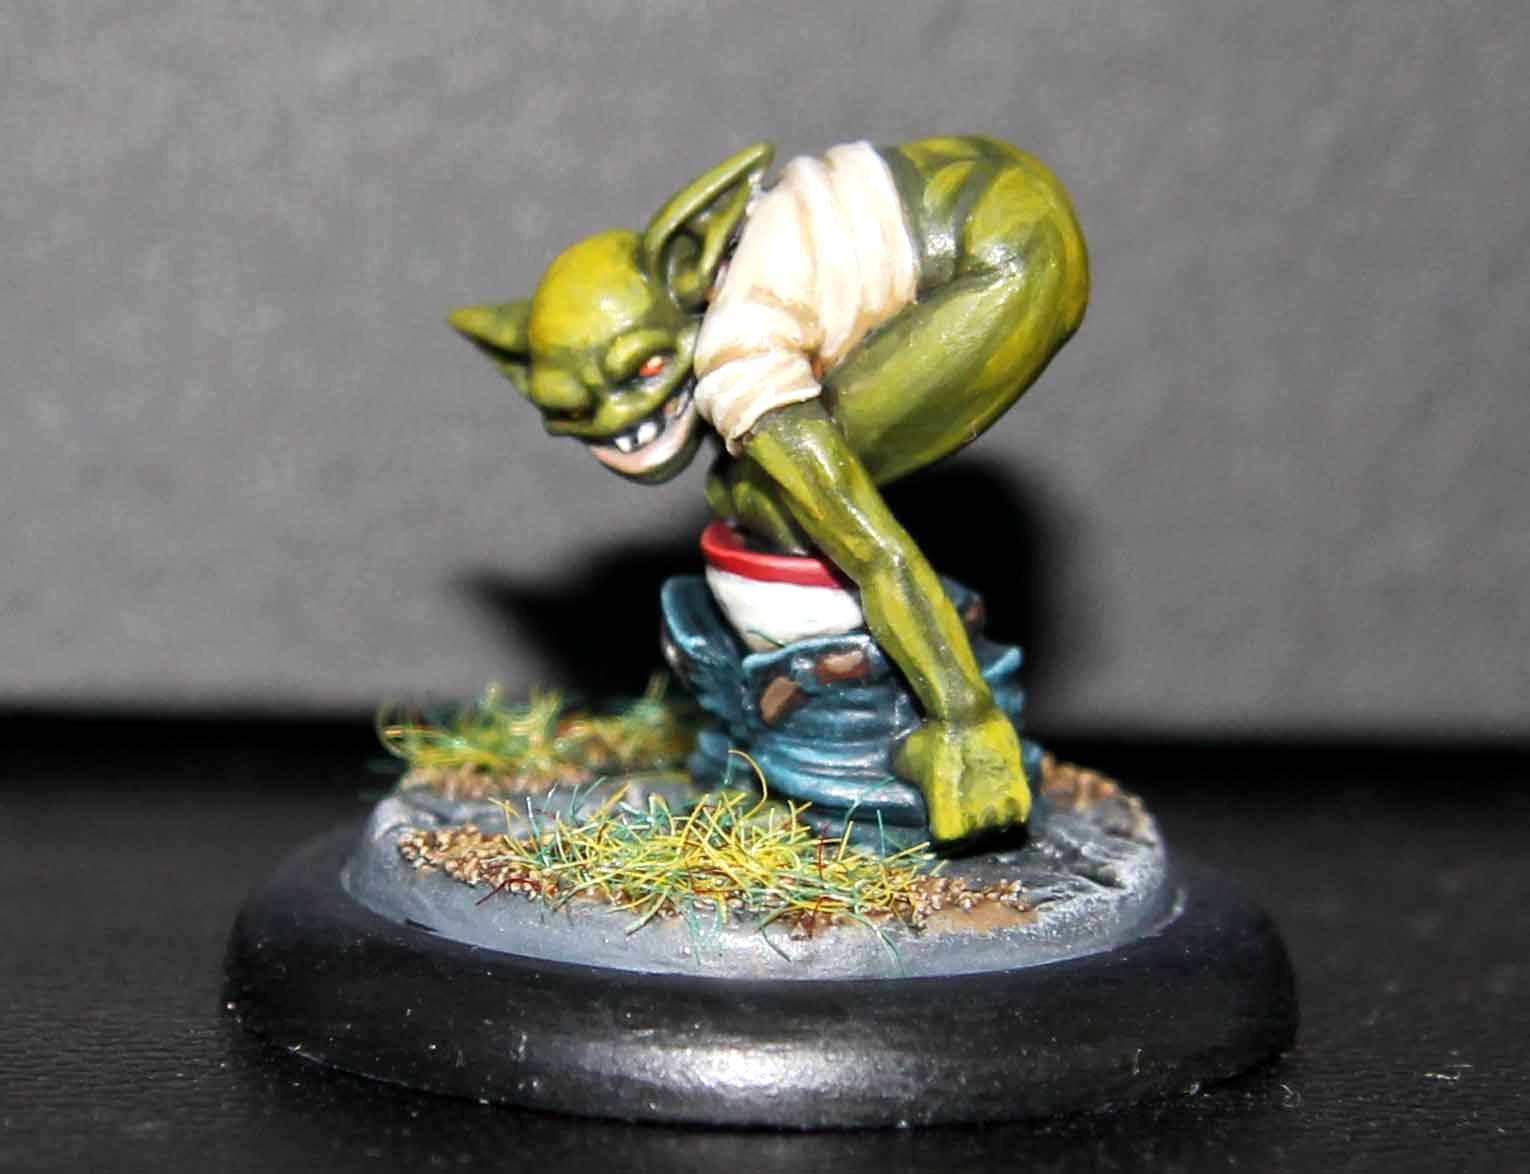 Gremlin, Lacroix, Malifaux, Young